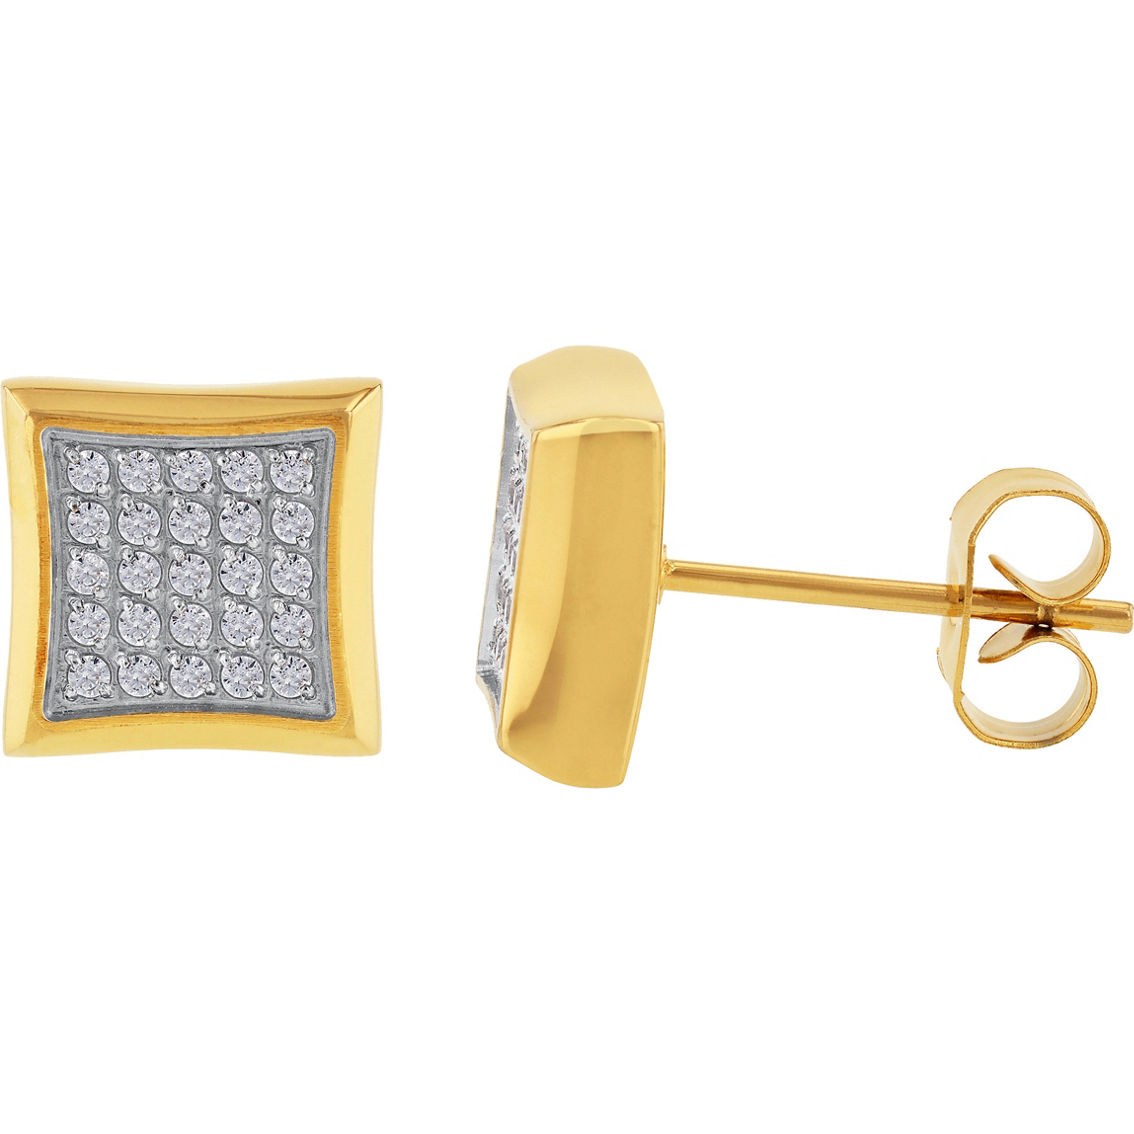 Yellow Gold Over Stainless Steel 1/4 CTW Diamond Earrings - Image 1 of 3